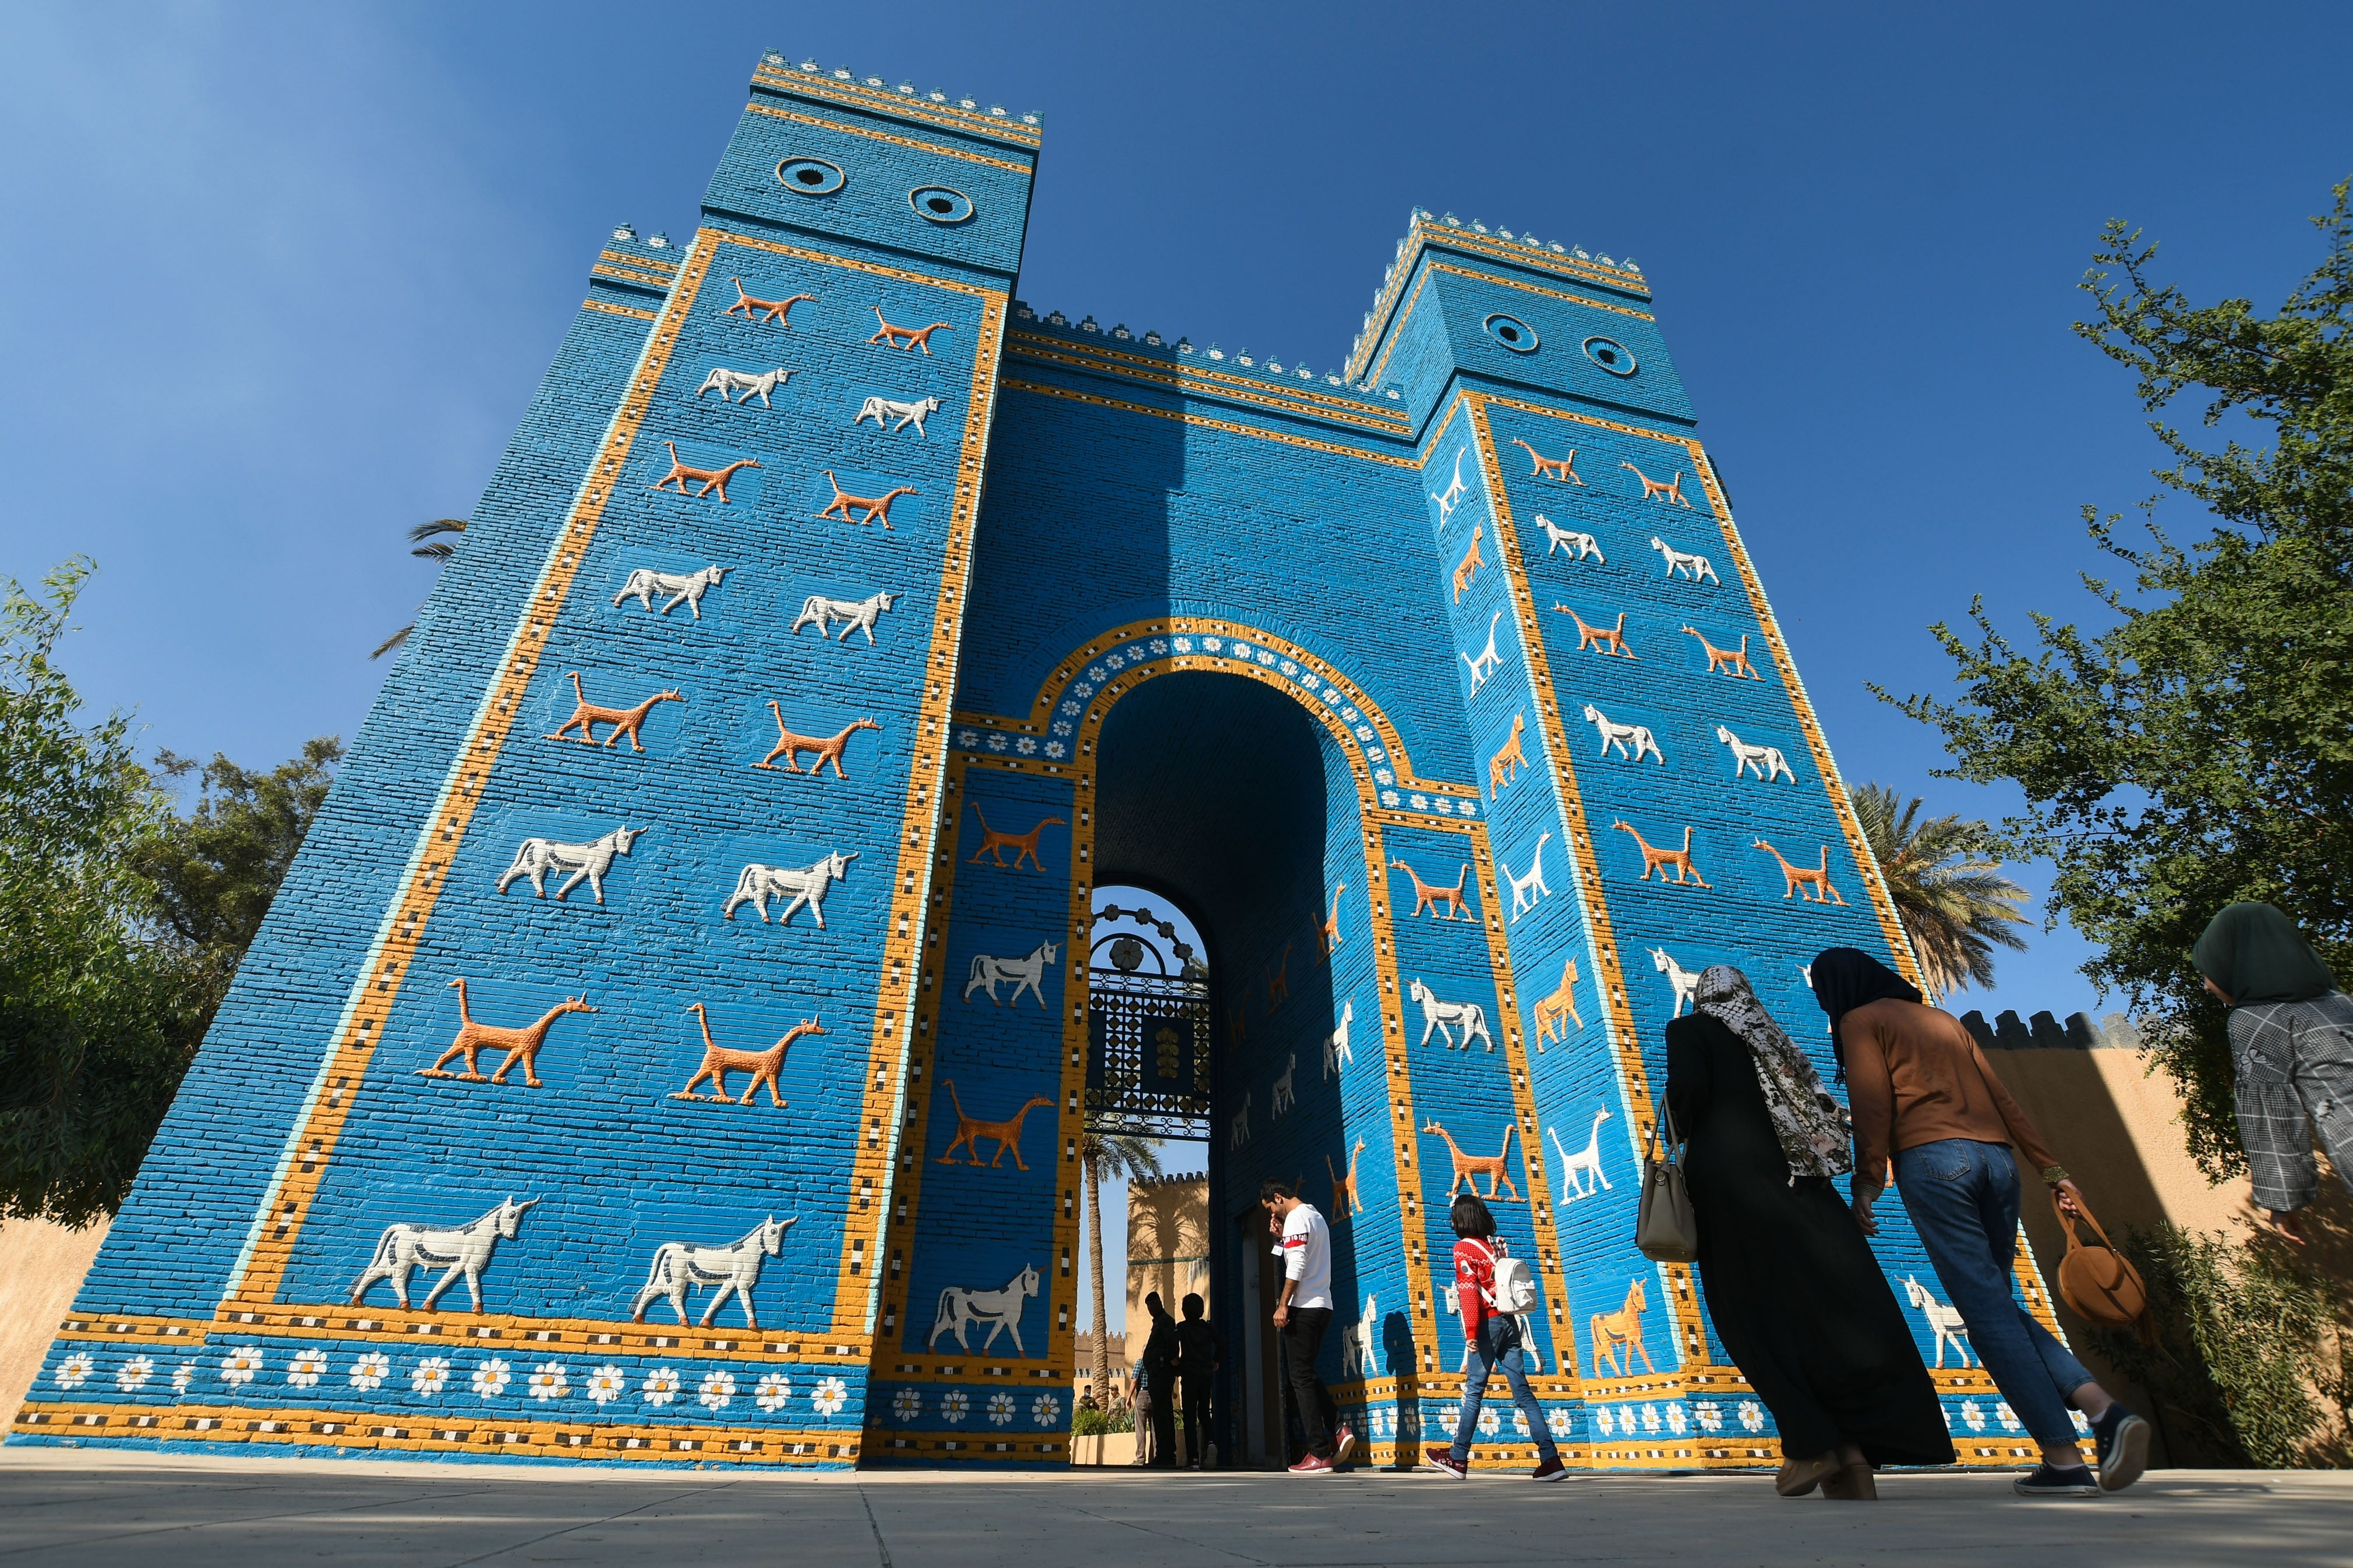 Visitors walk towards a replica of the Gate of Ishtar at the archaeological site of ancient Babylon, about 50 miles south of the Iraqi capital Baghdad, on 14 November 2020